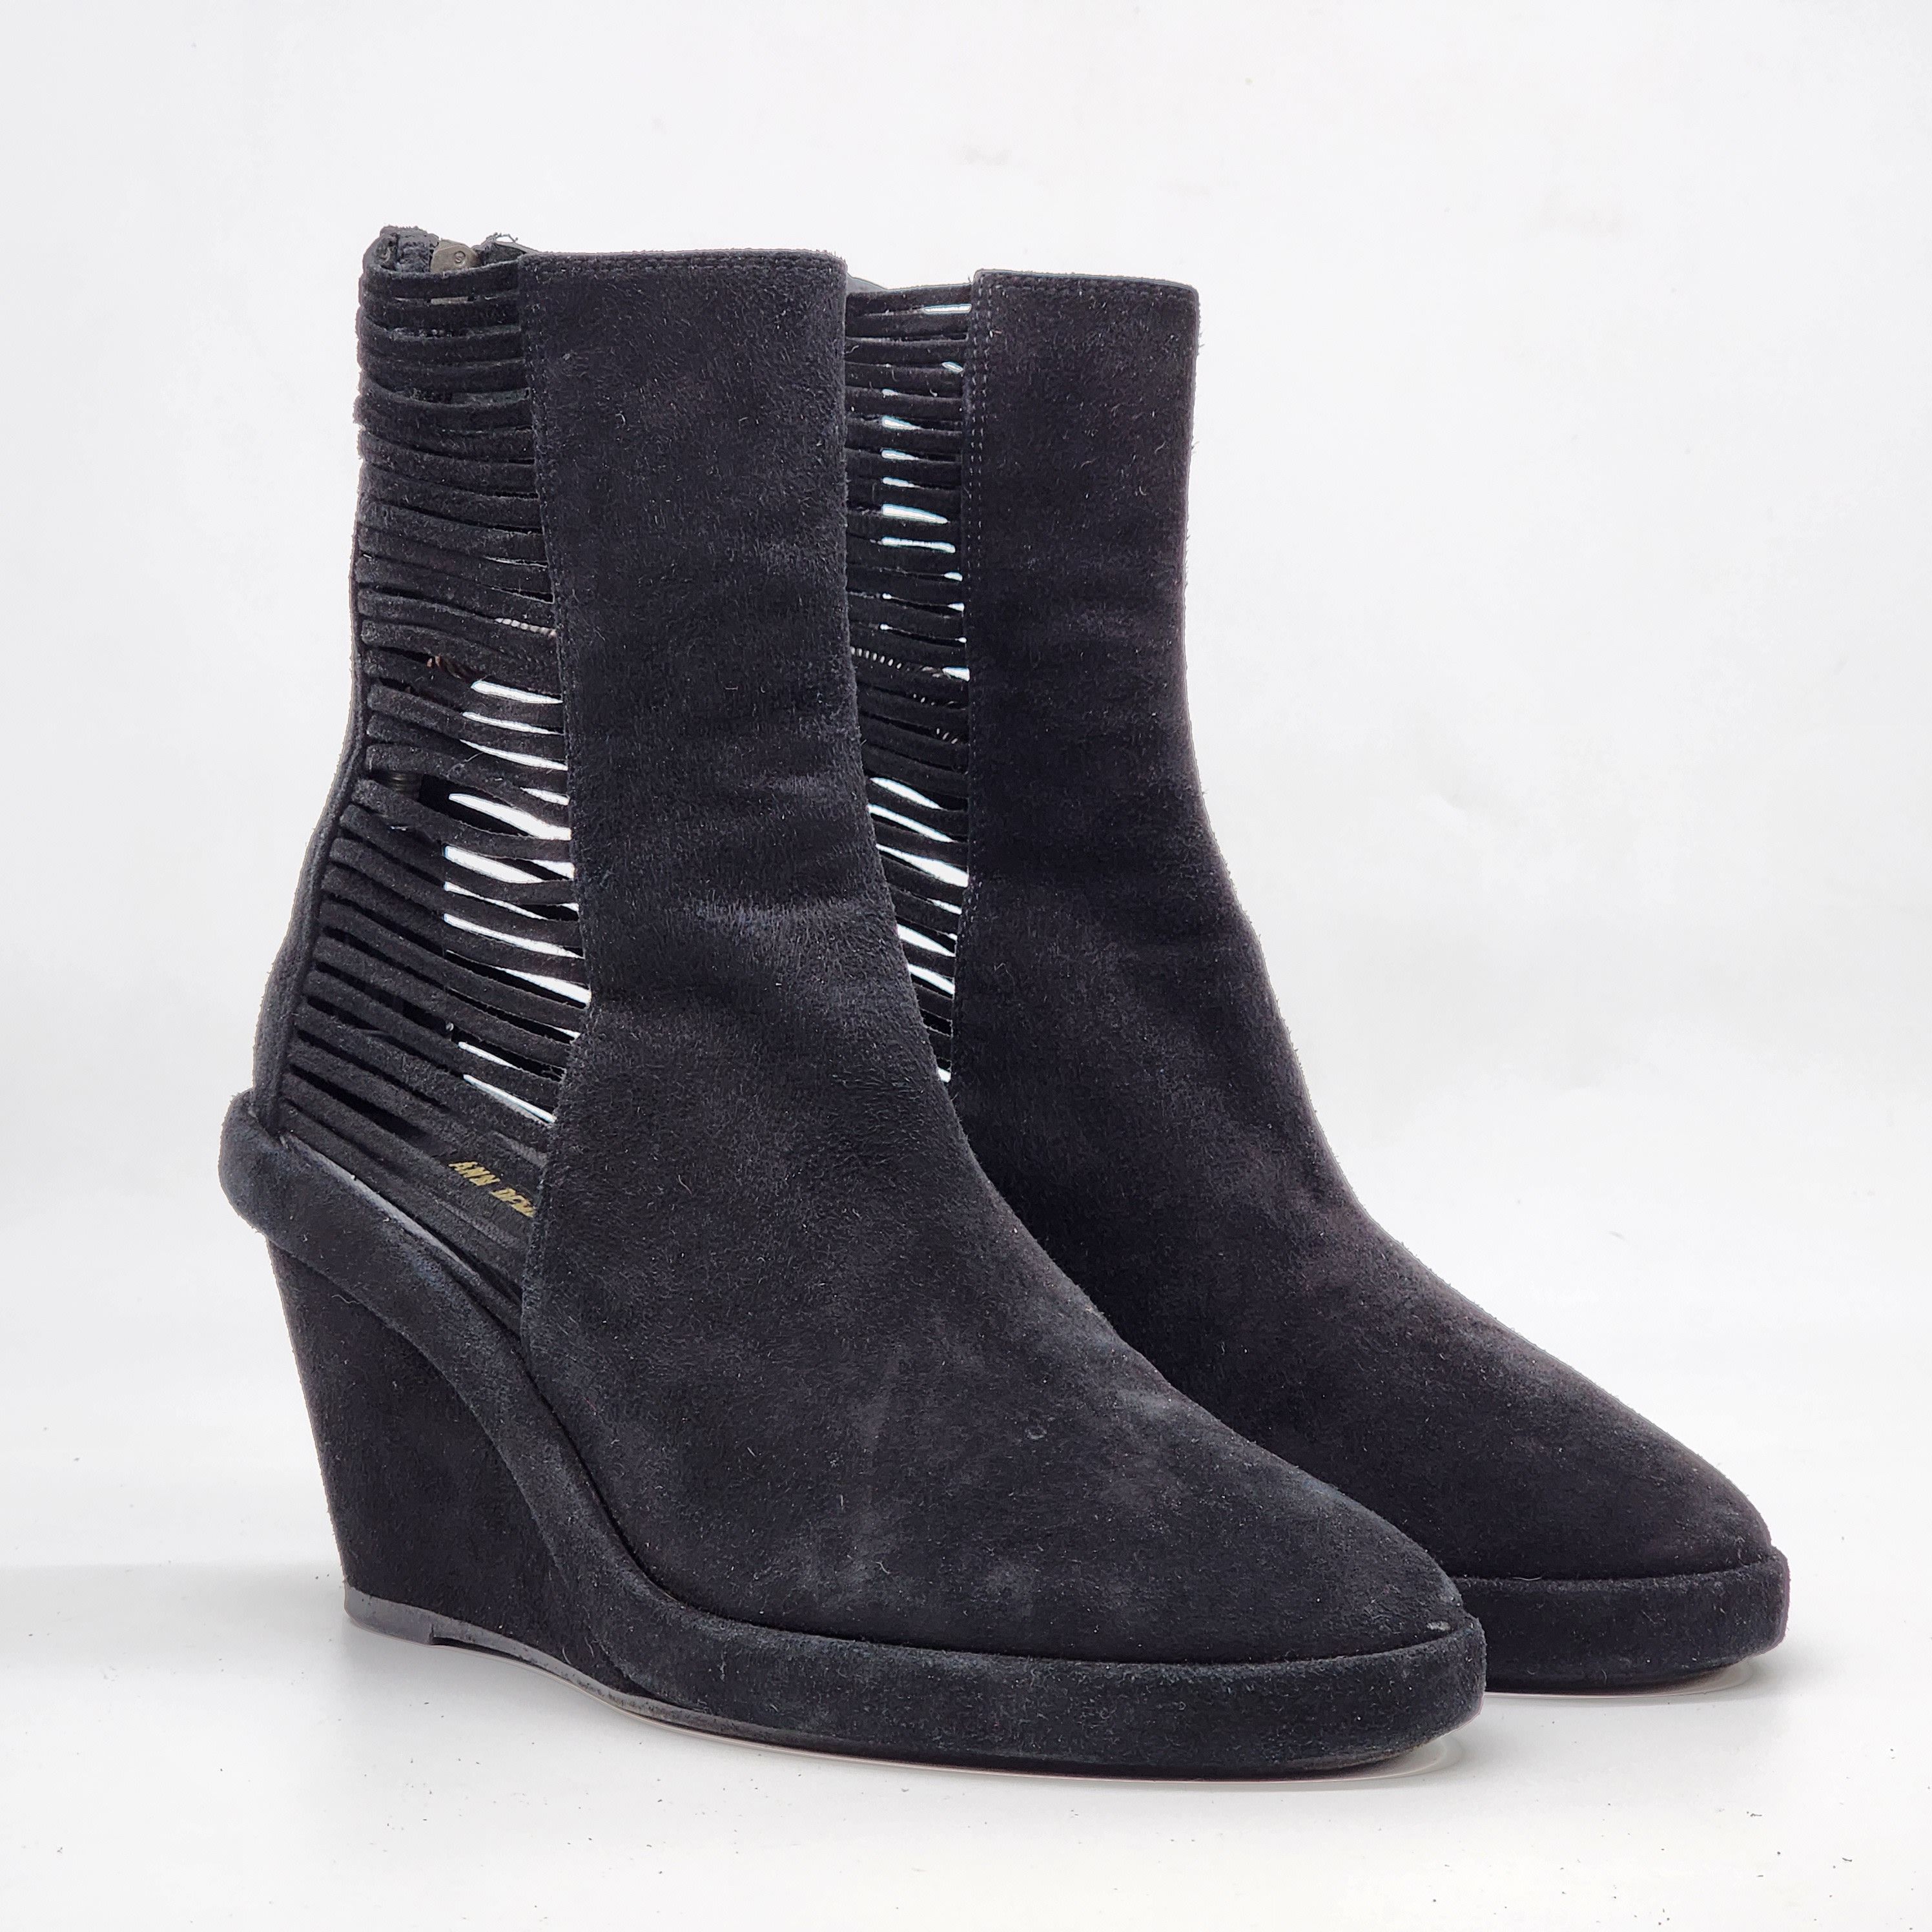 Ann Demeulemeester - Black Suede Slatted Wedge Boots - 3